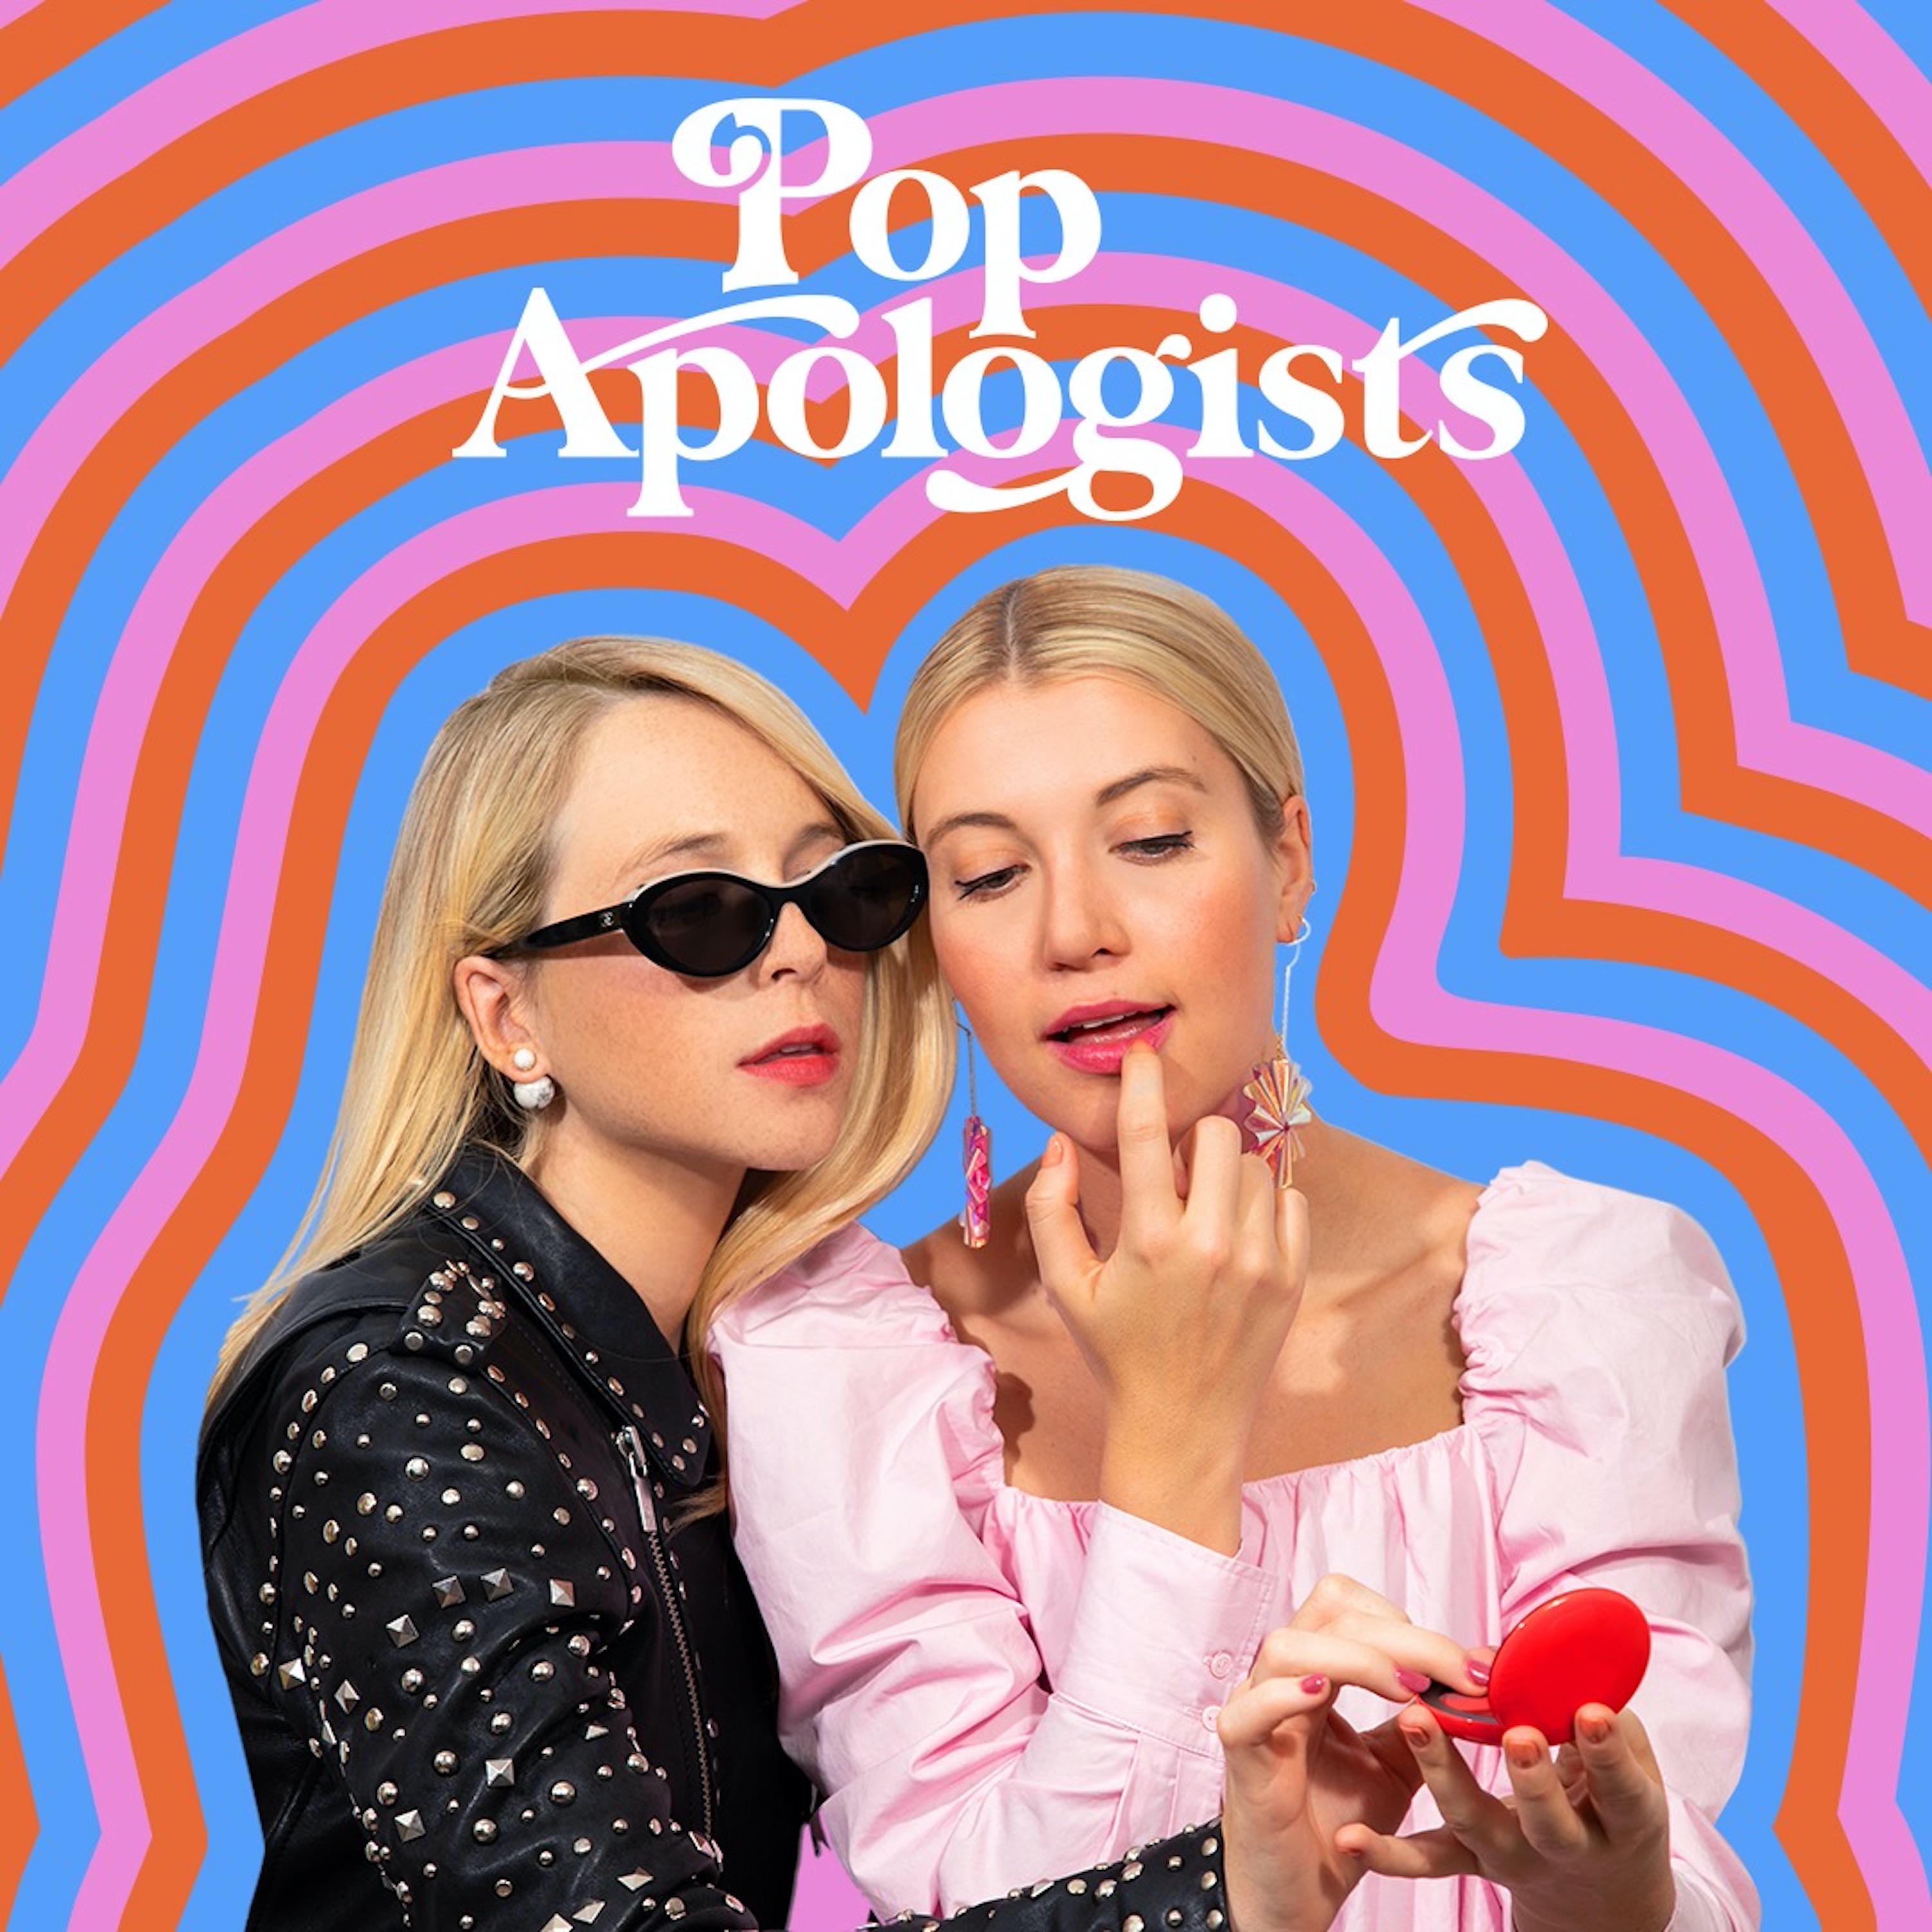 Pop Apologists:Pop Apologists